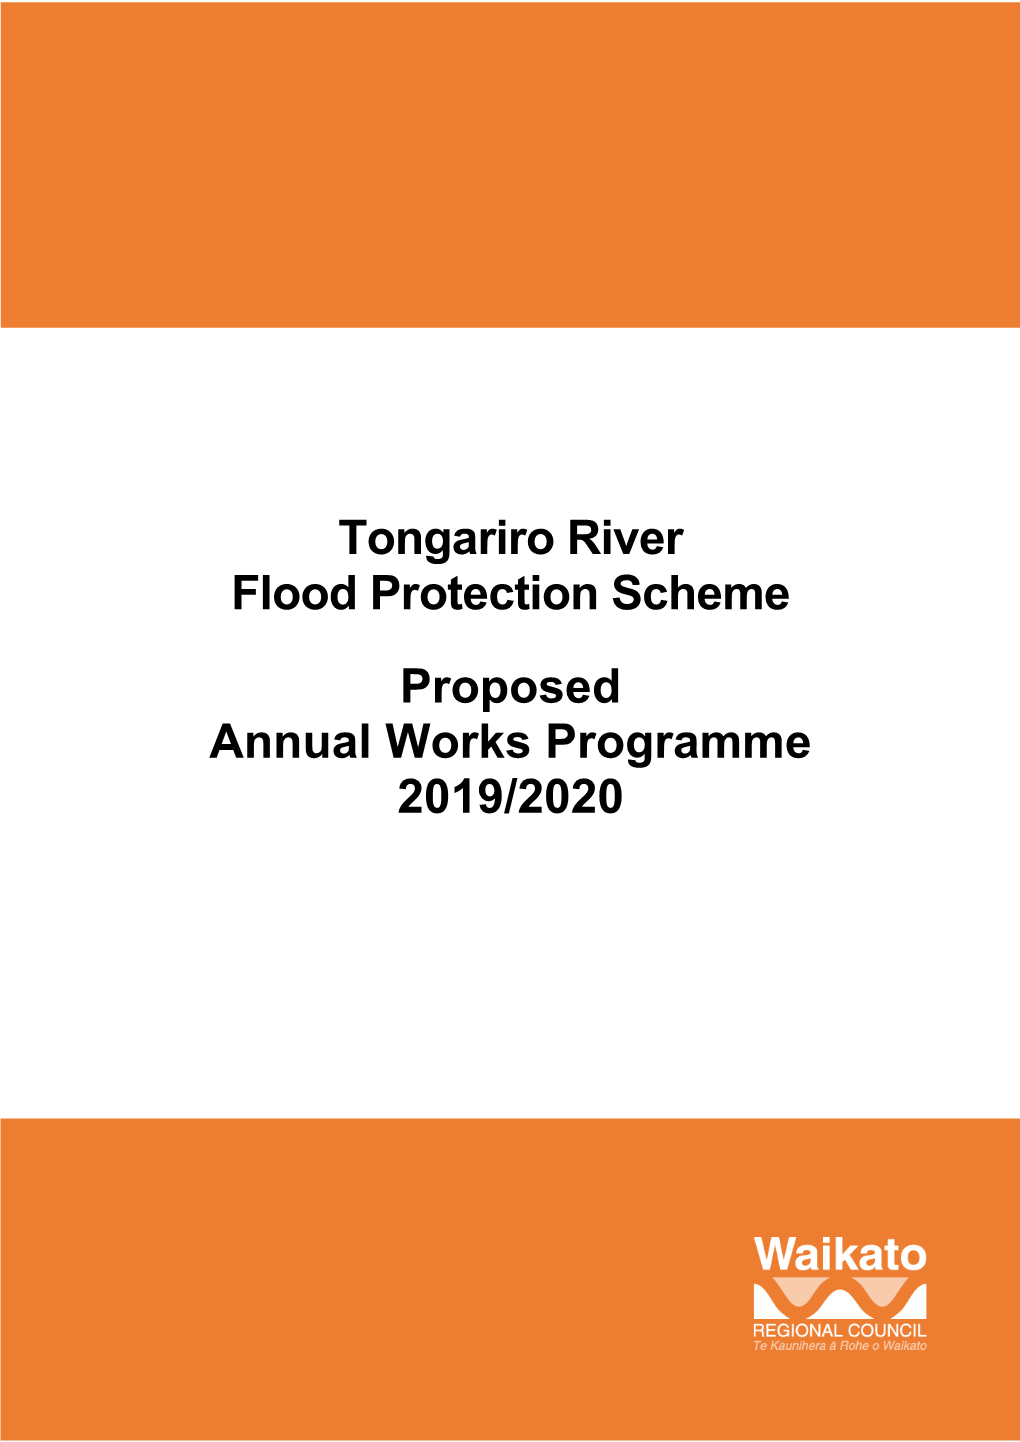 Tongariro River Flood Protection Scheme Proposed Annual Works Programme 2019/2020